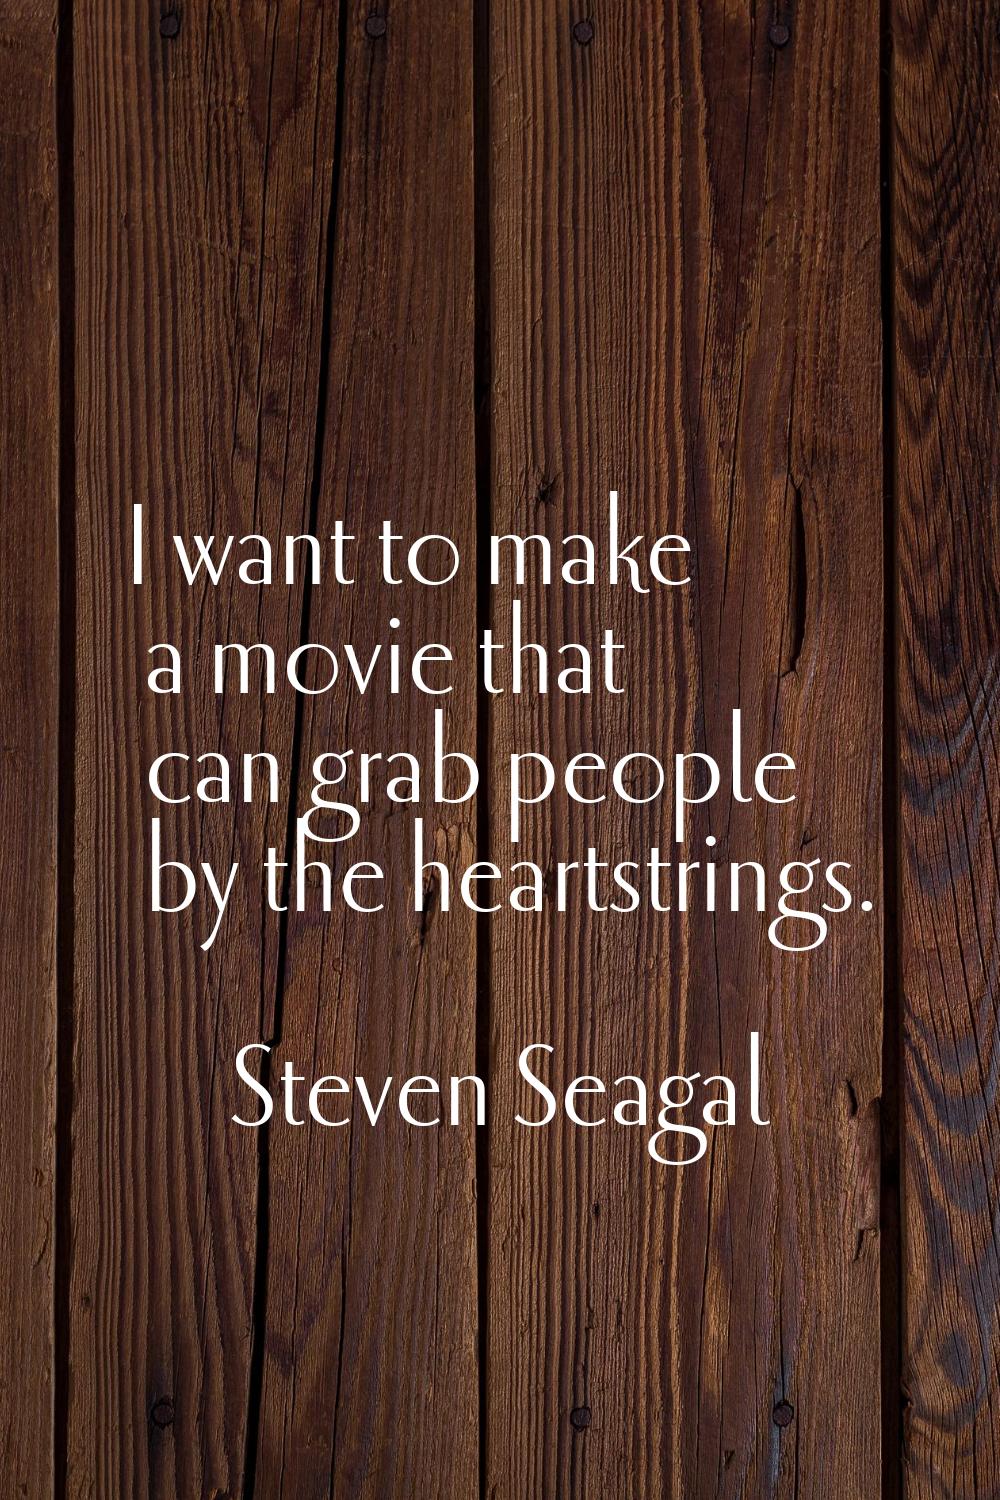 I want to make a movie that can grab people by the heartstrings.